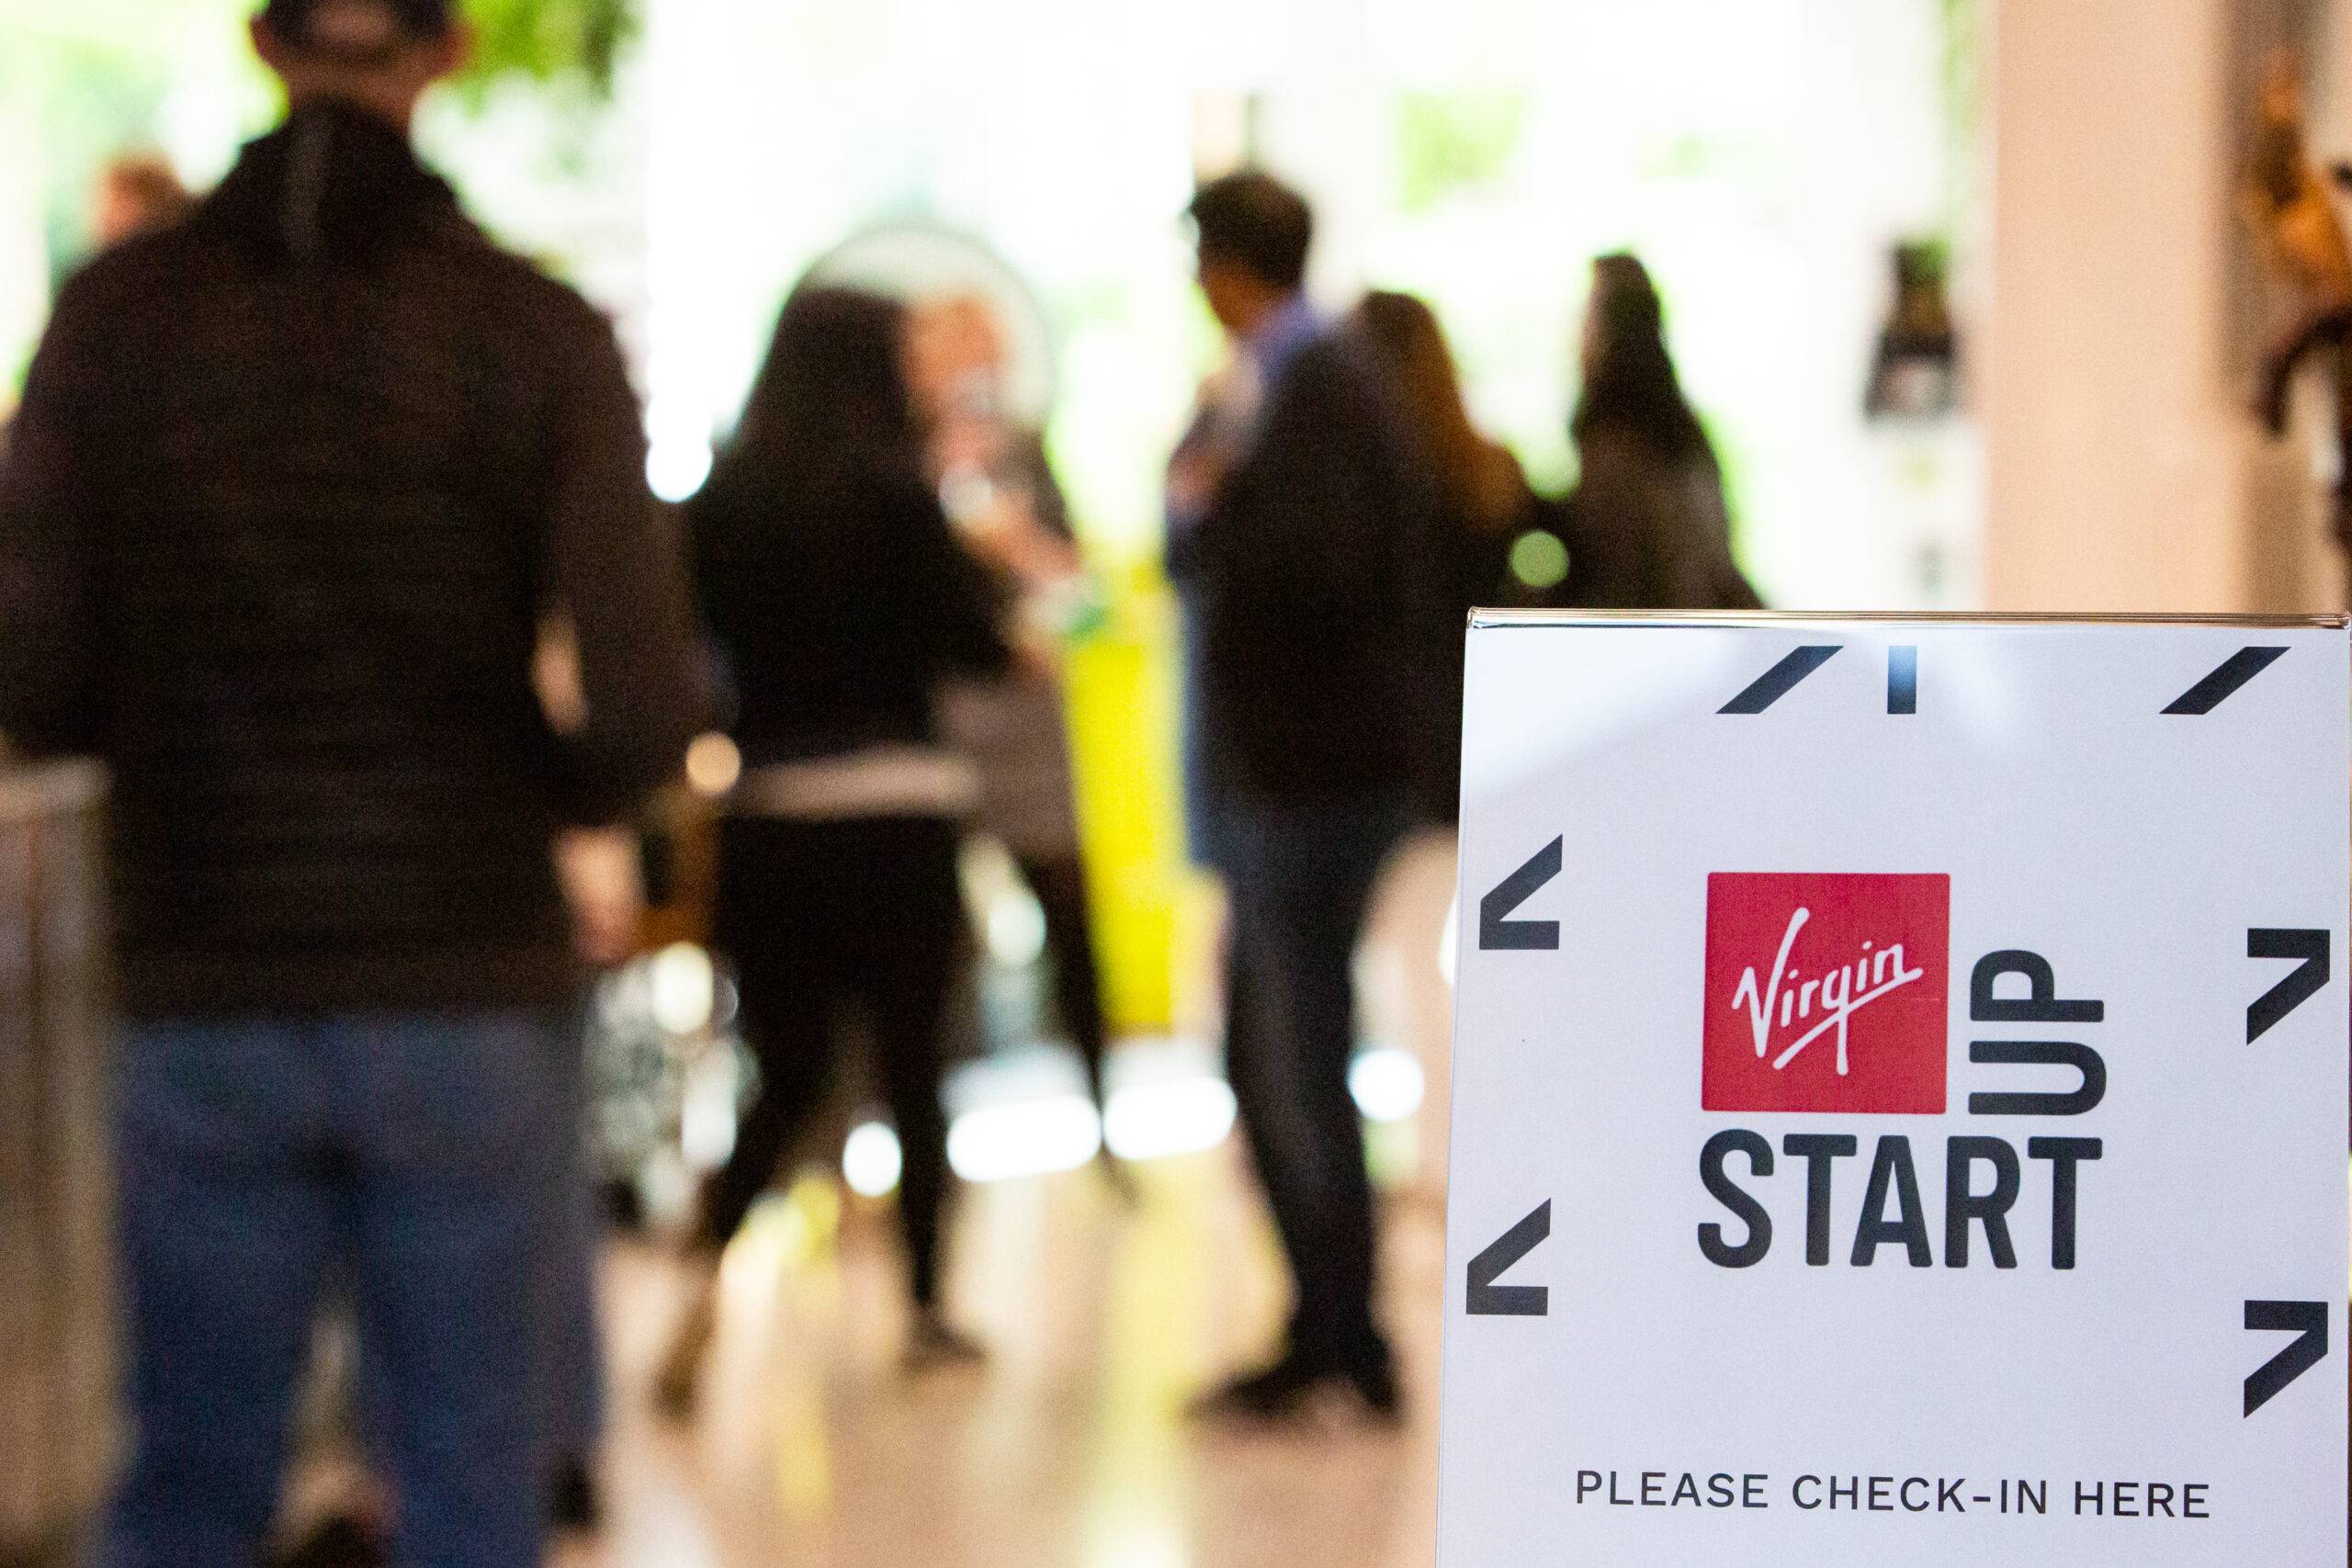 A passion for entrepreneurship: An interview with Sutin Yang, Head of Scaleups at Virgin StartUp